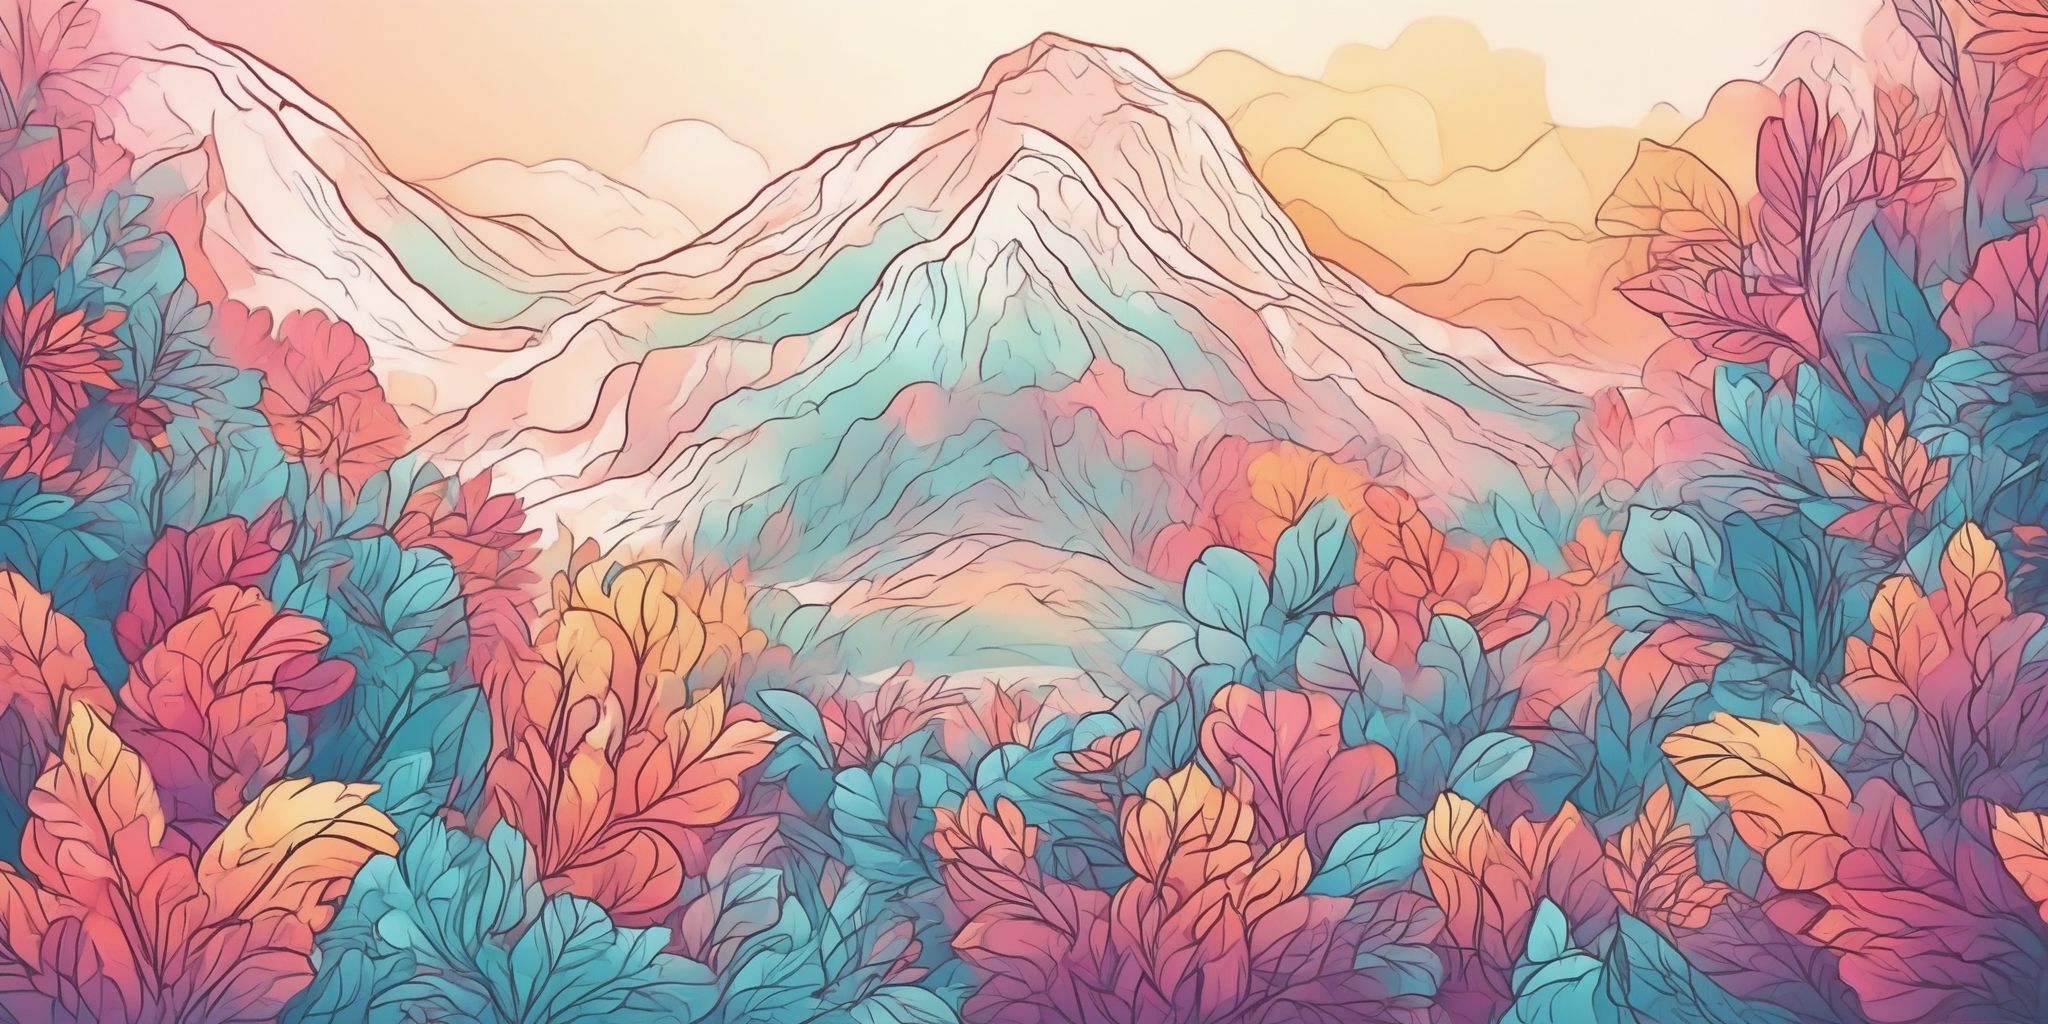 highlight in illustration style with gradients and white background